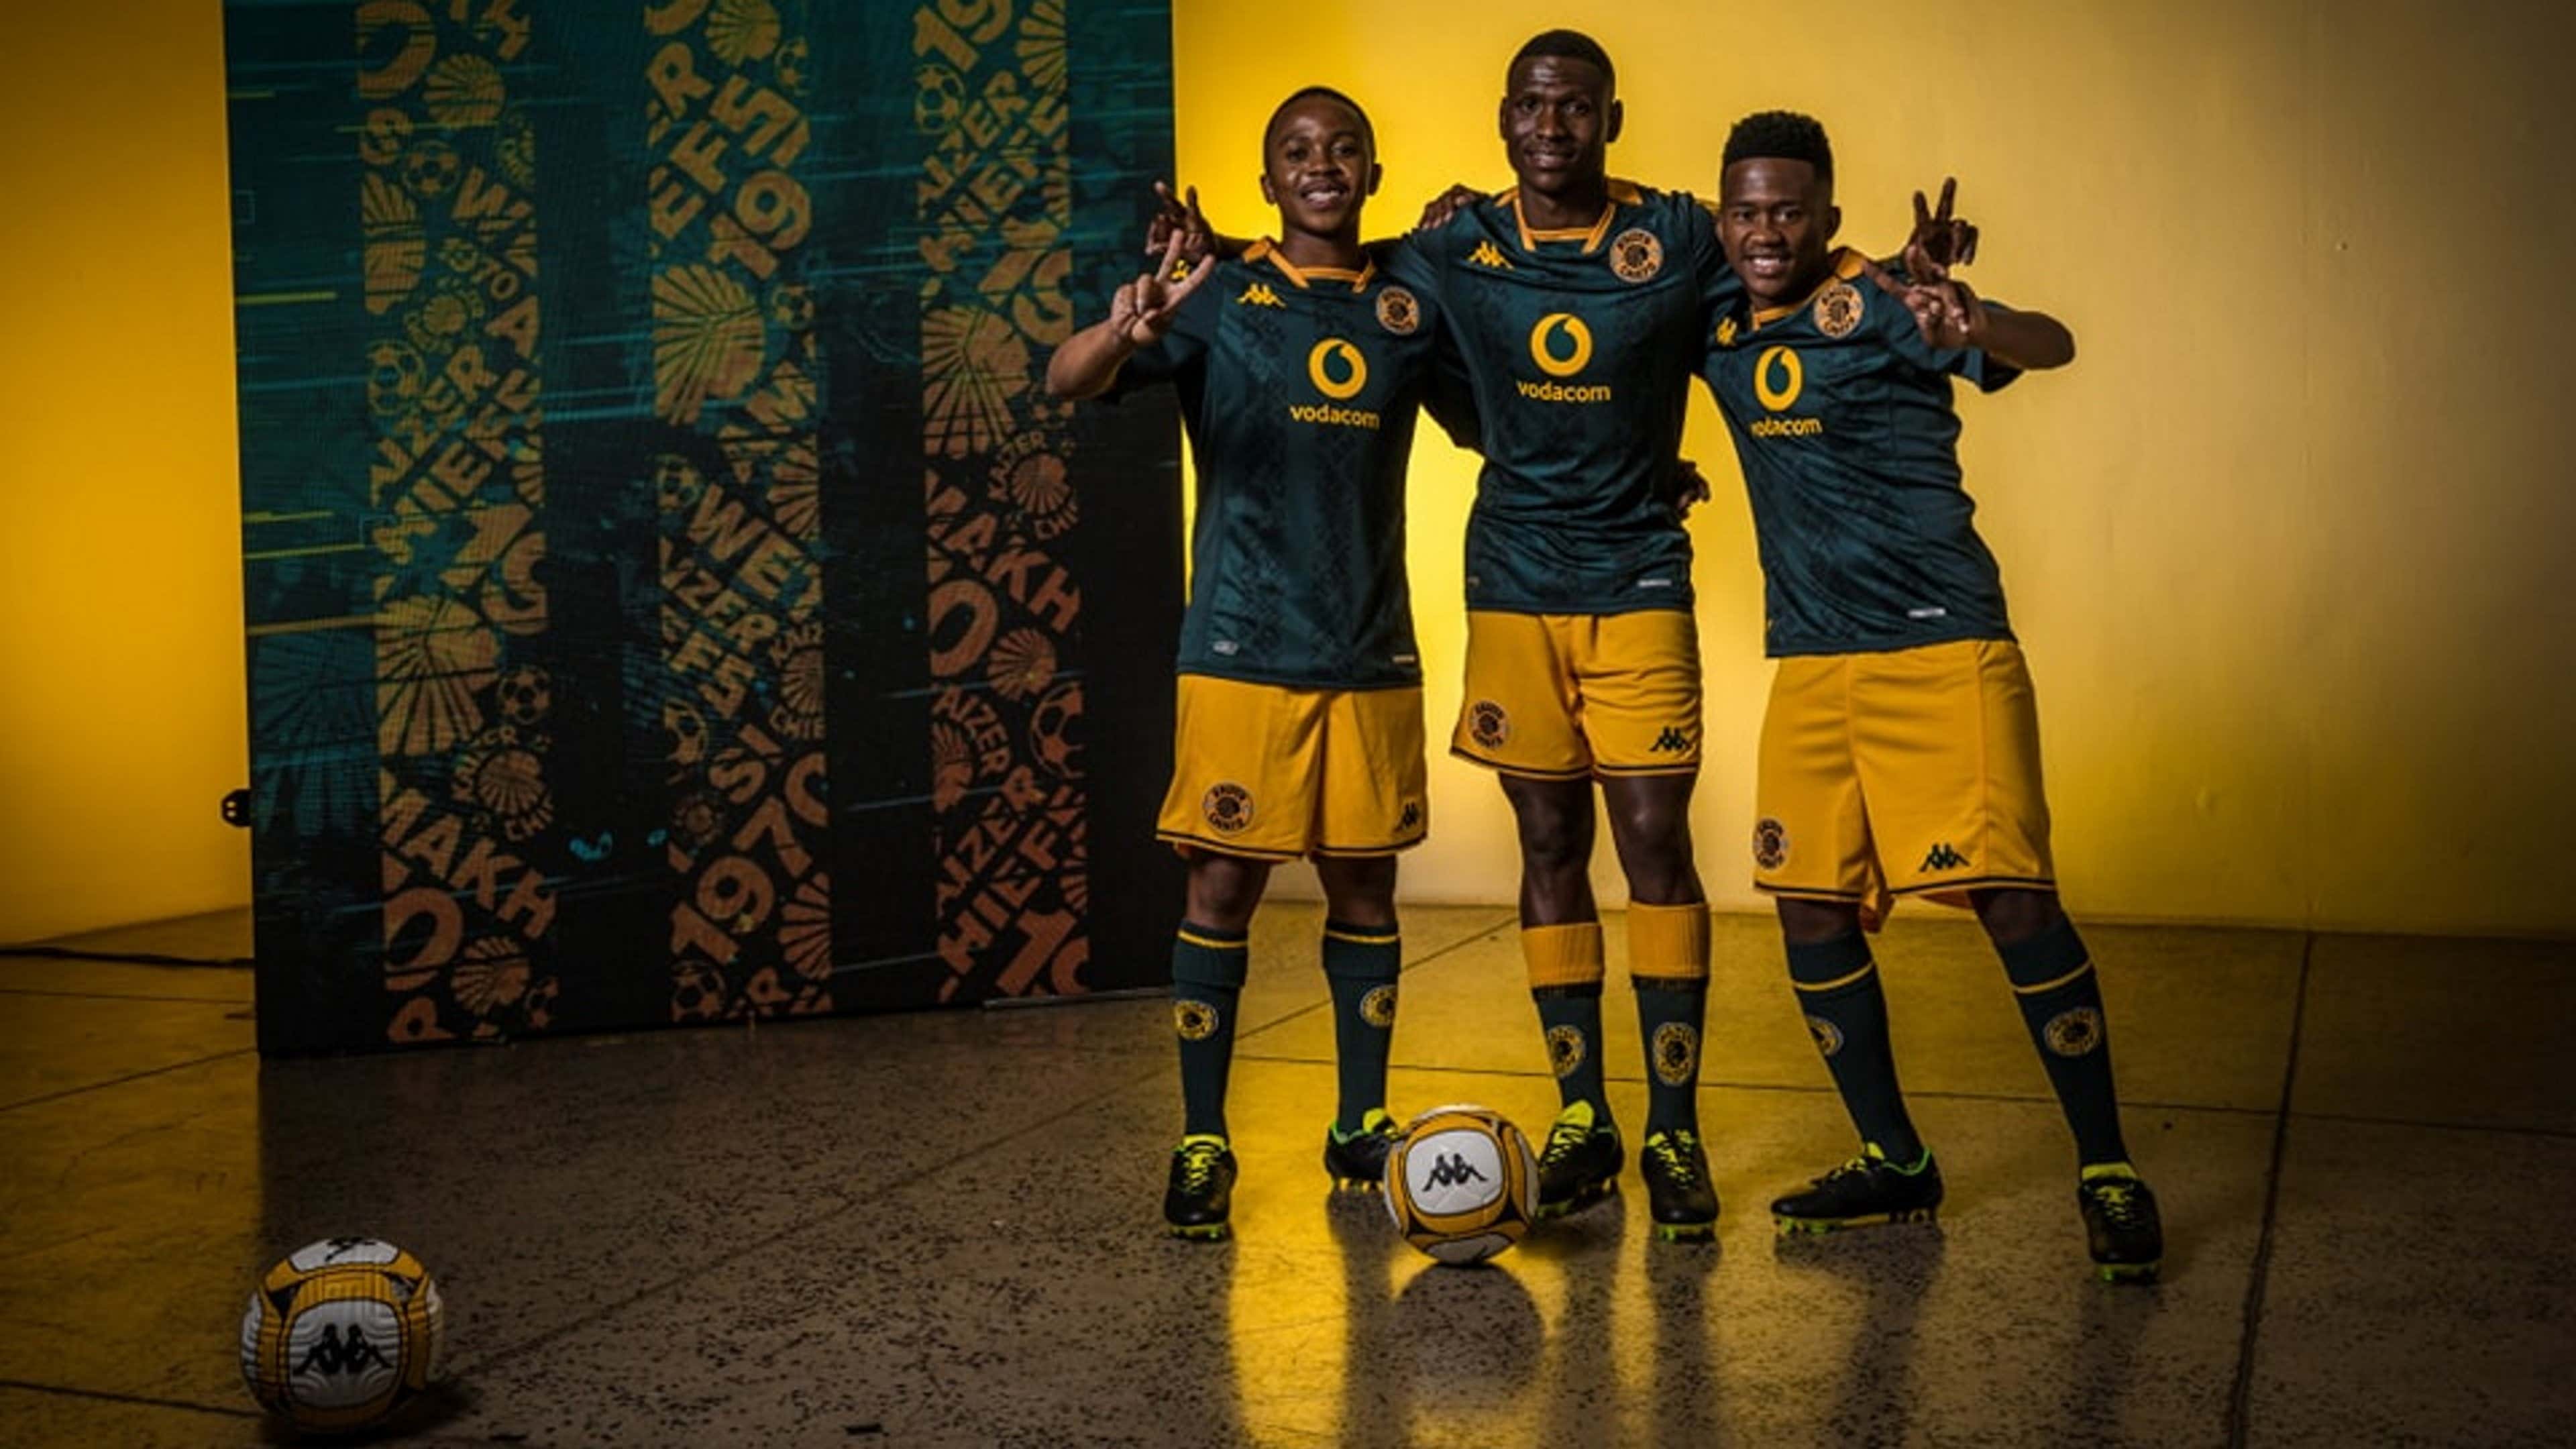 New Sensational Home And Away Kits For Kaizer Chiefs For 2021-22 Season -  Africa Top Sports